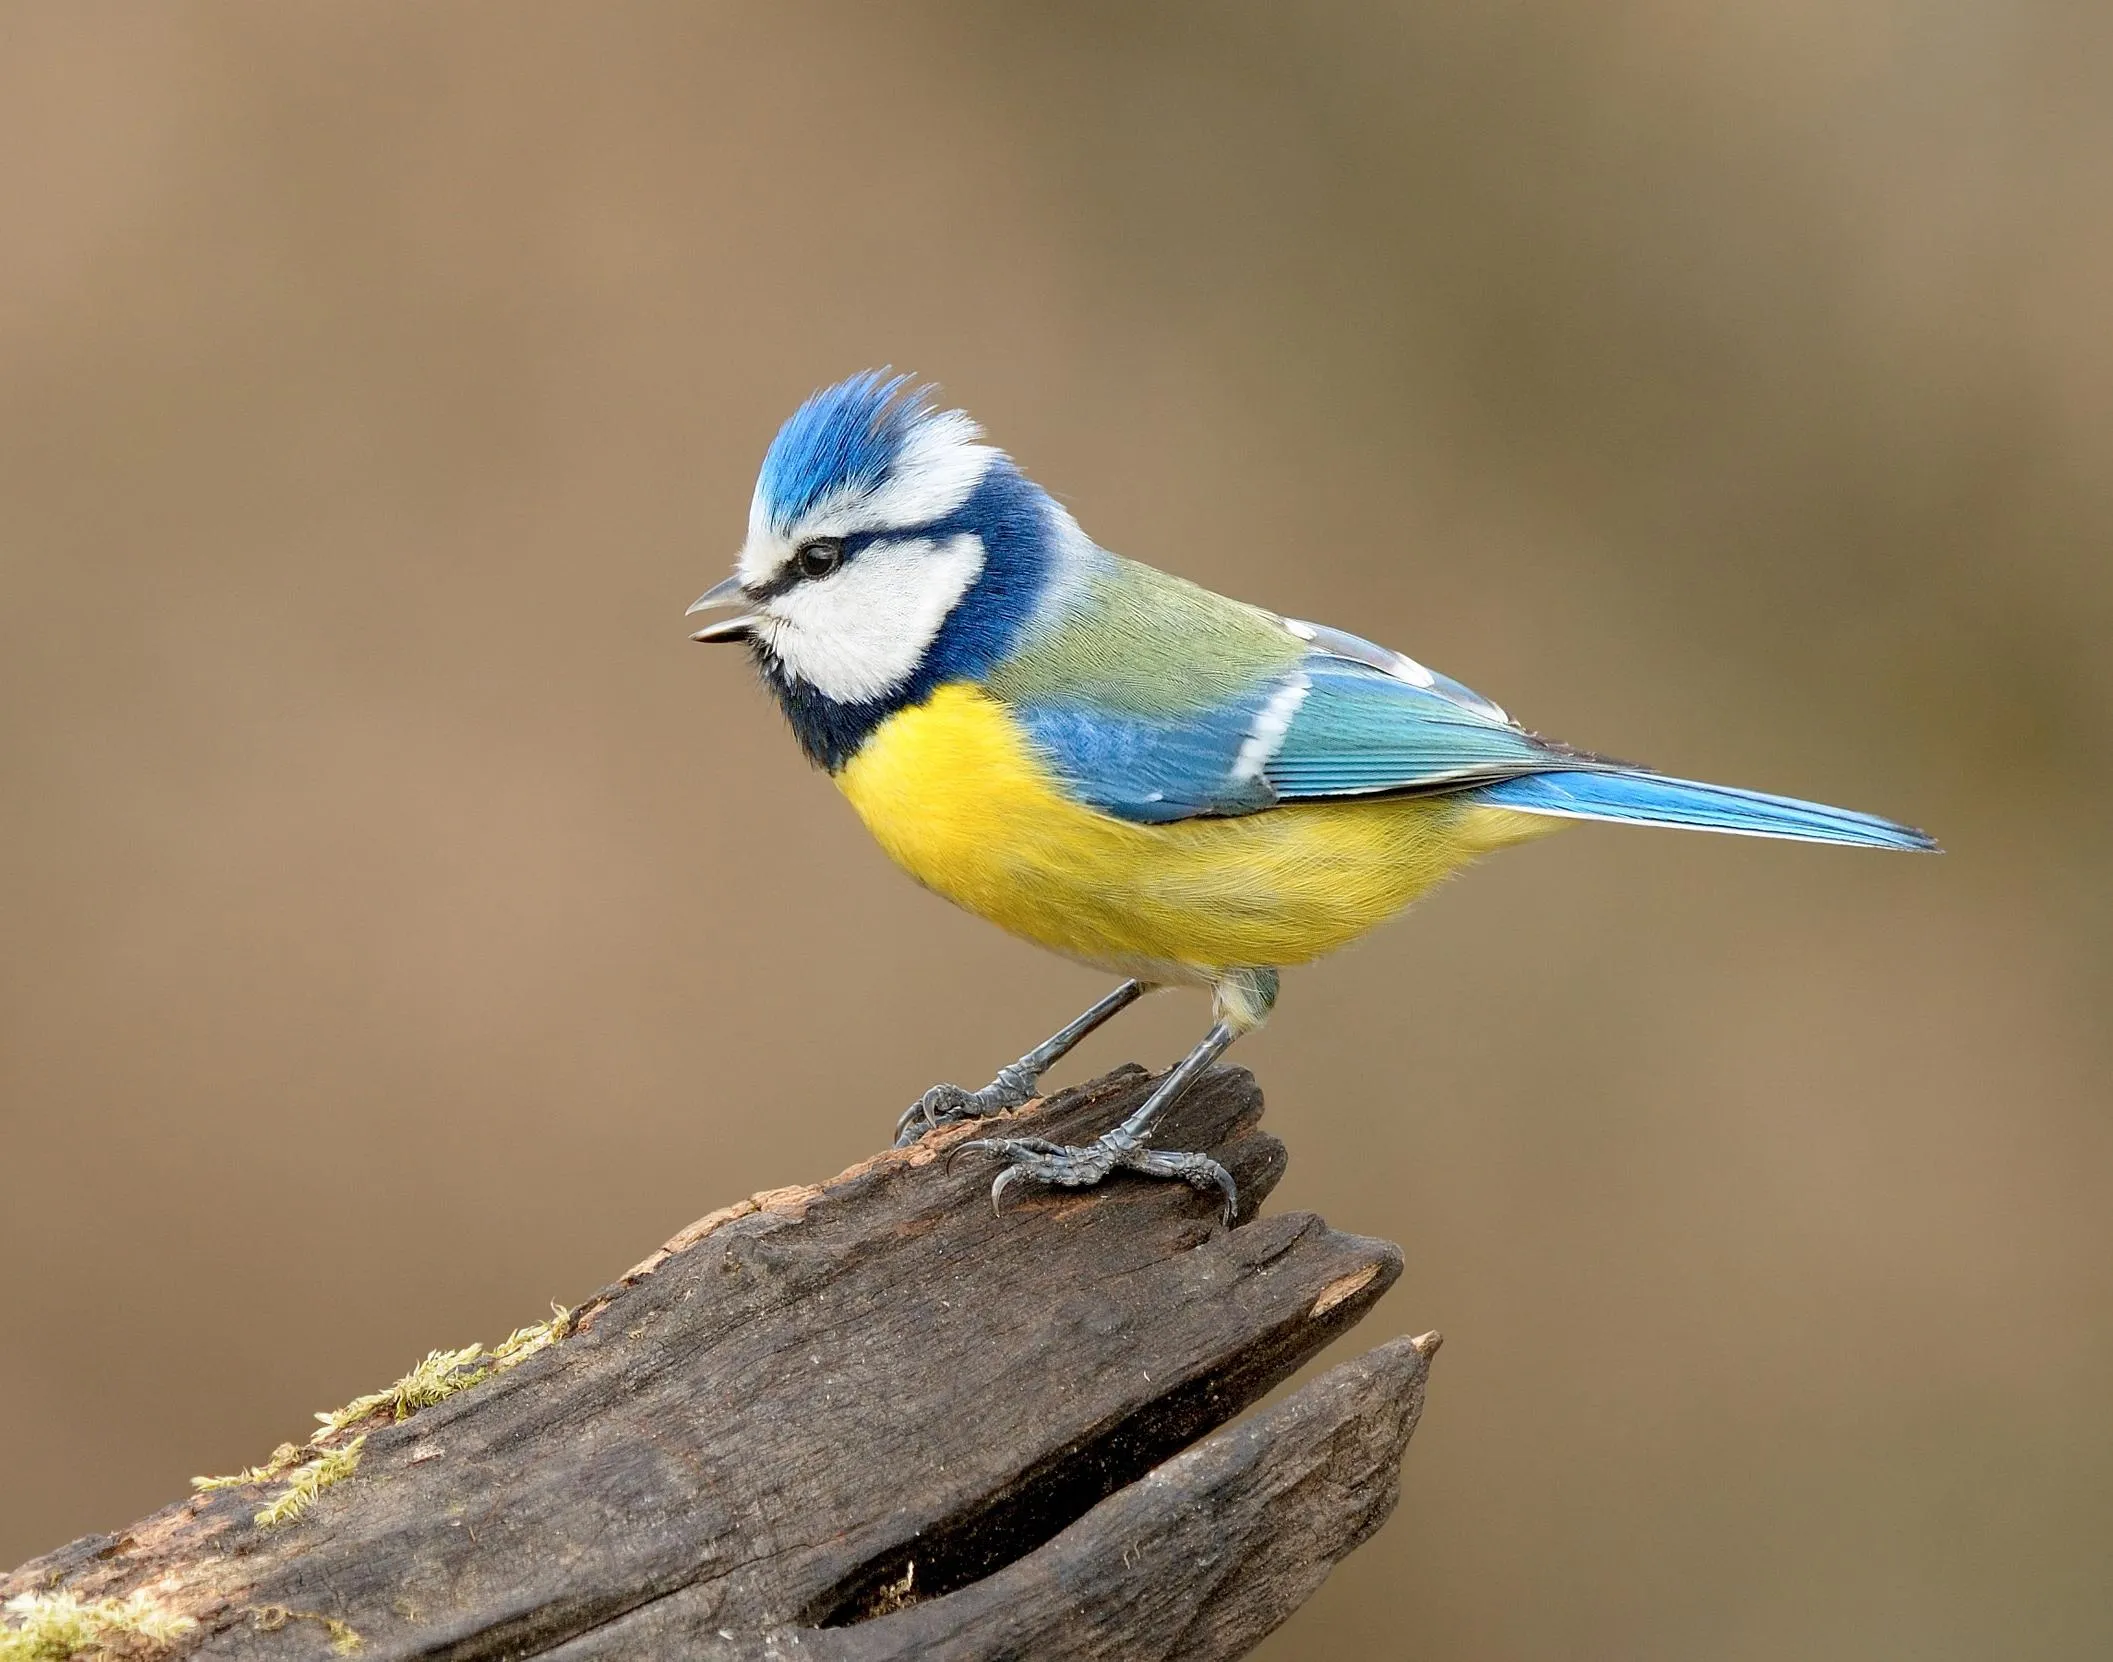 A Blue Tit stood on the top of a log.